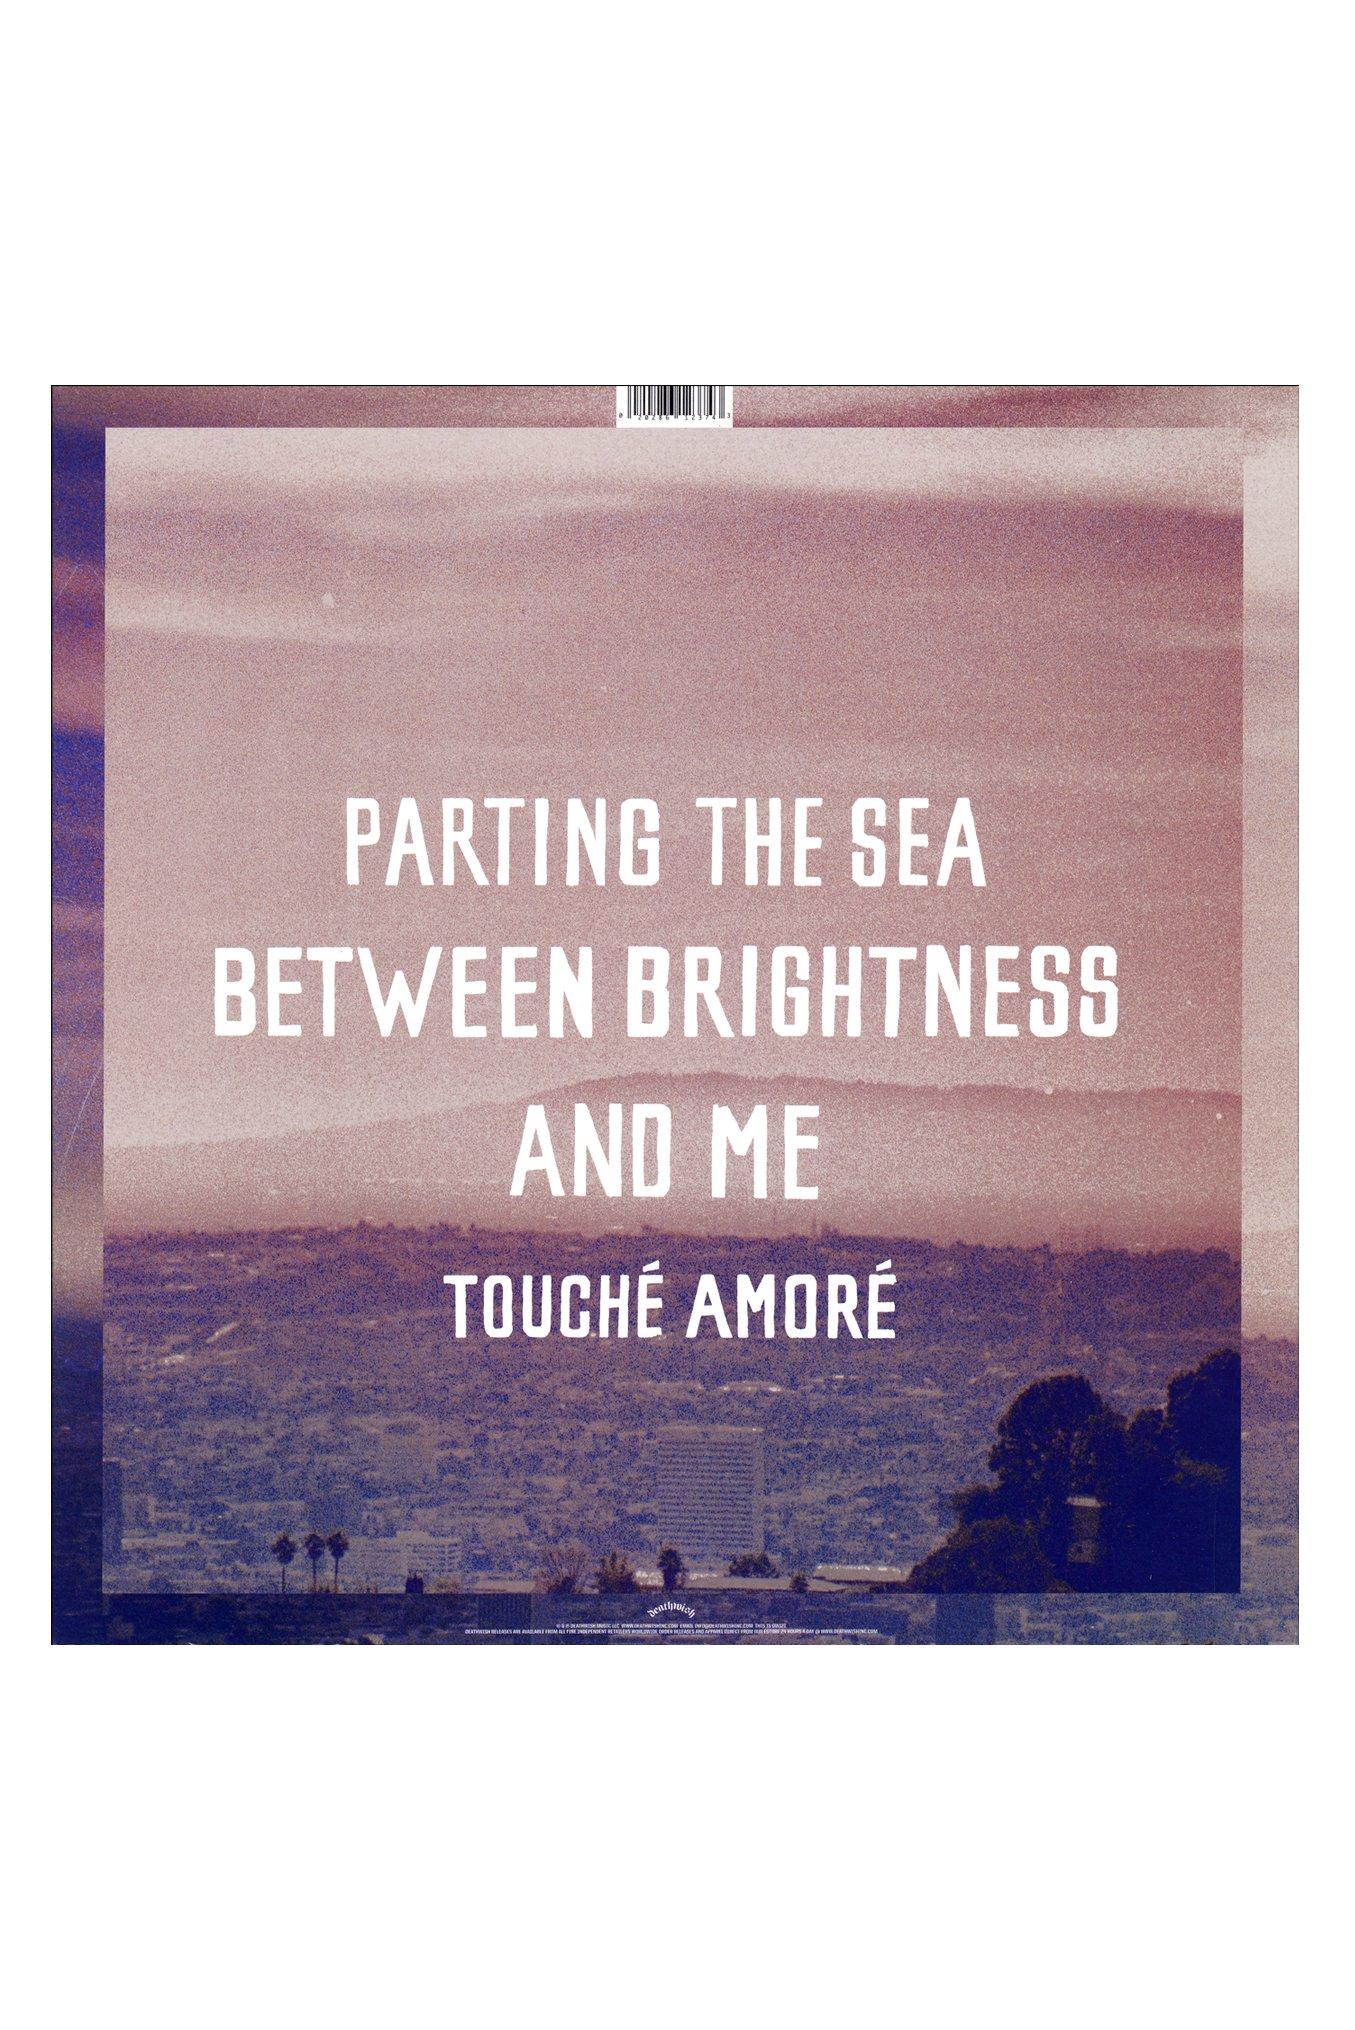 Touche Amore - Parting The Sea Between Brightness And Me Vinyl LP, , alternate